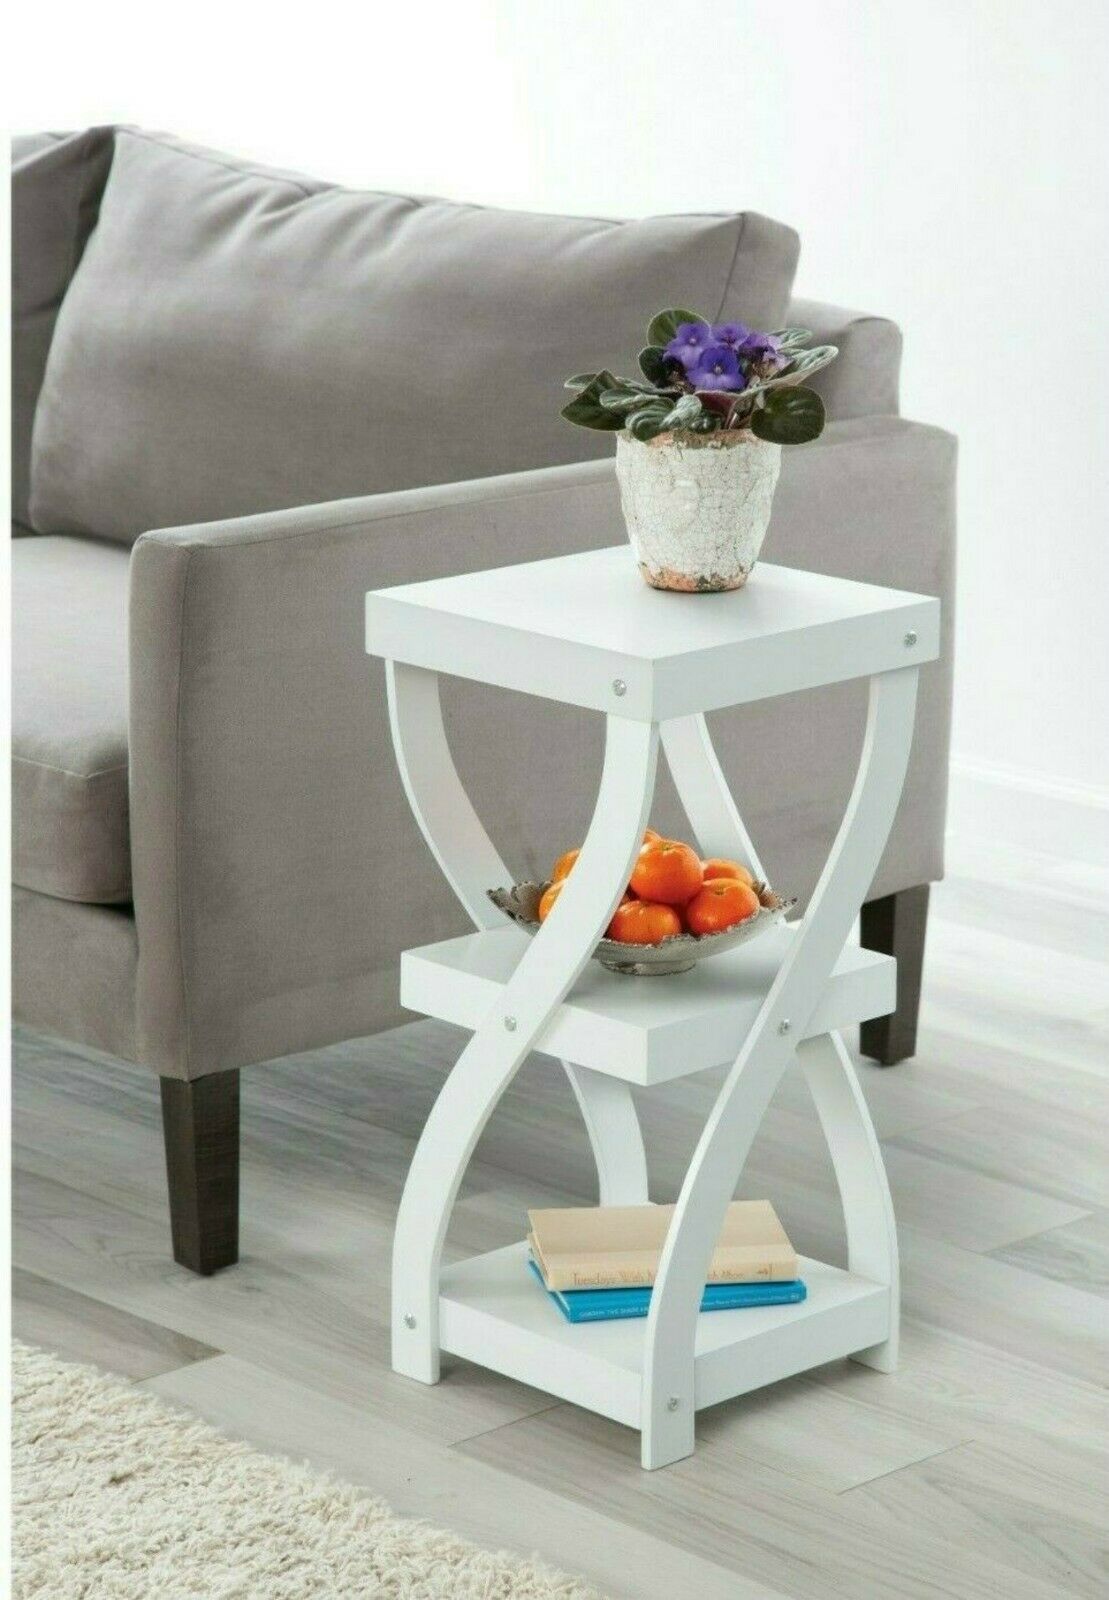 Side Sofa Table  3 Tier Accent Coffee Entrance Table White Wooden Modern  Twisted Design Console End Table With Shelves – Walmart Pertaining To Wood Accent Coffee Tables (View 10 of 20)